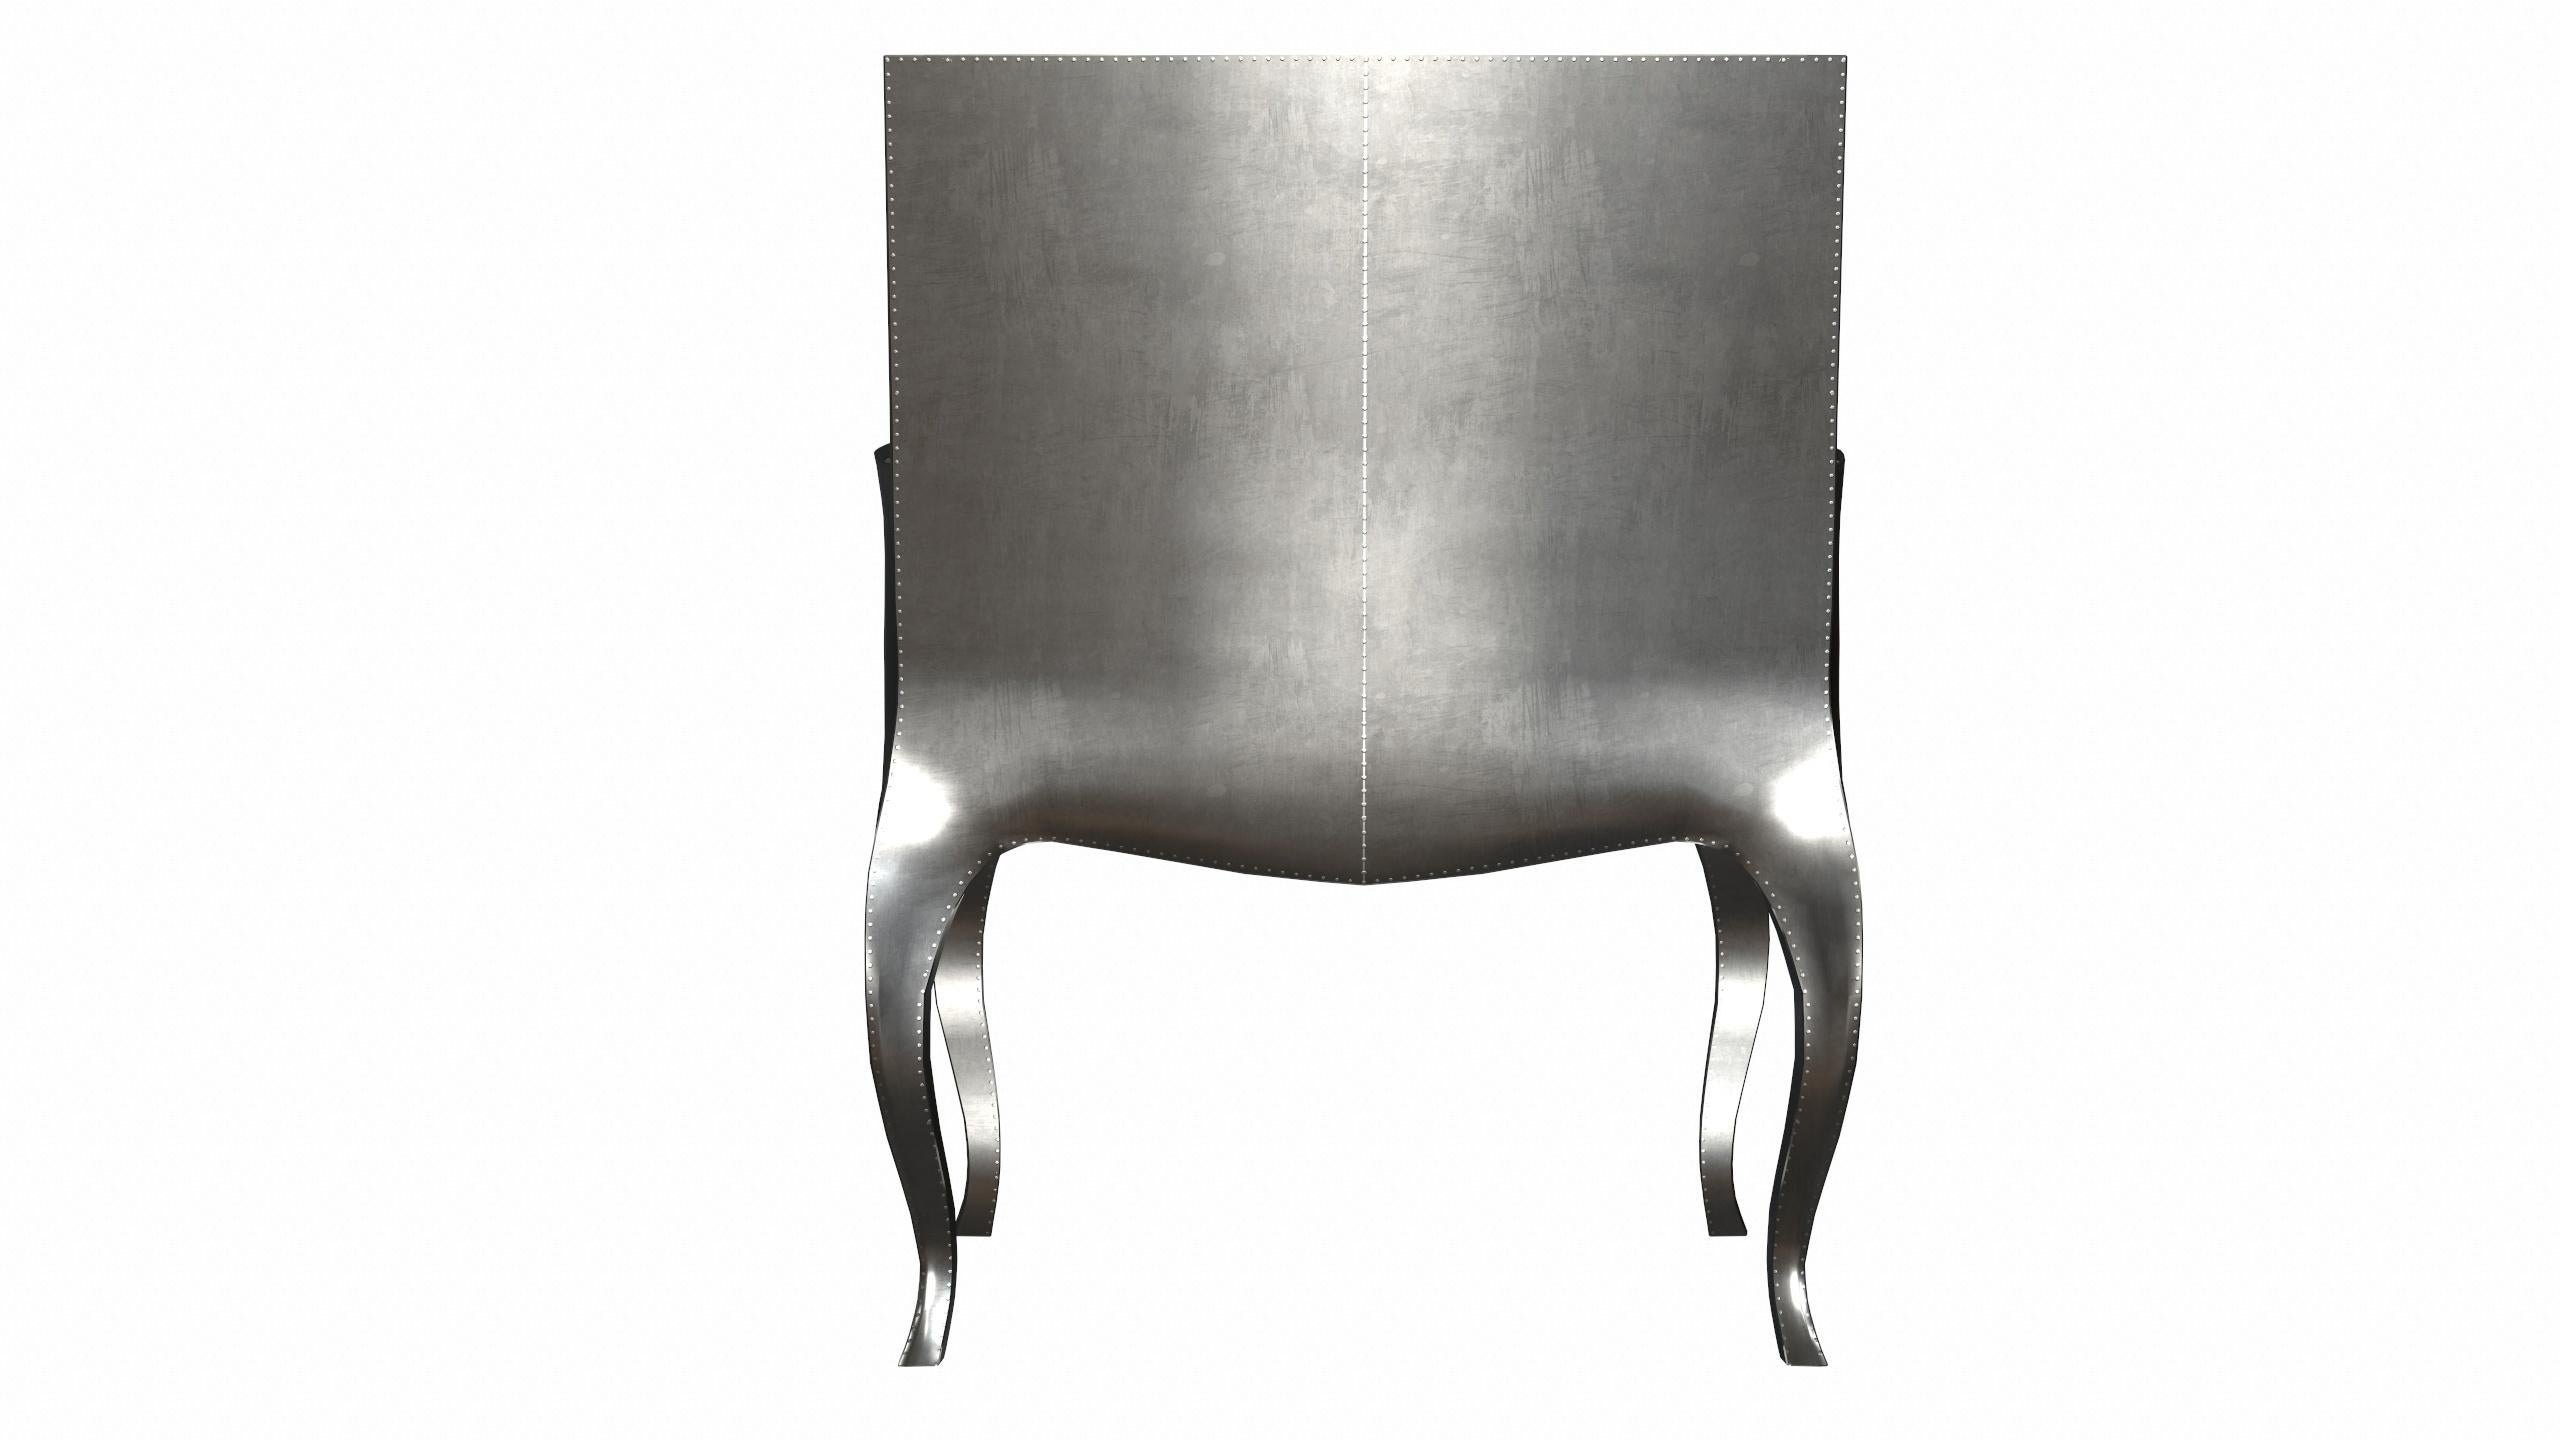 Art Deco Chairs in Smooth White Bronze by Paul Mathieu for S. Odegard For Sale 10